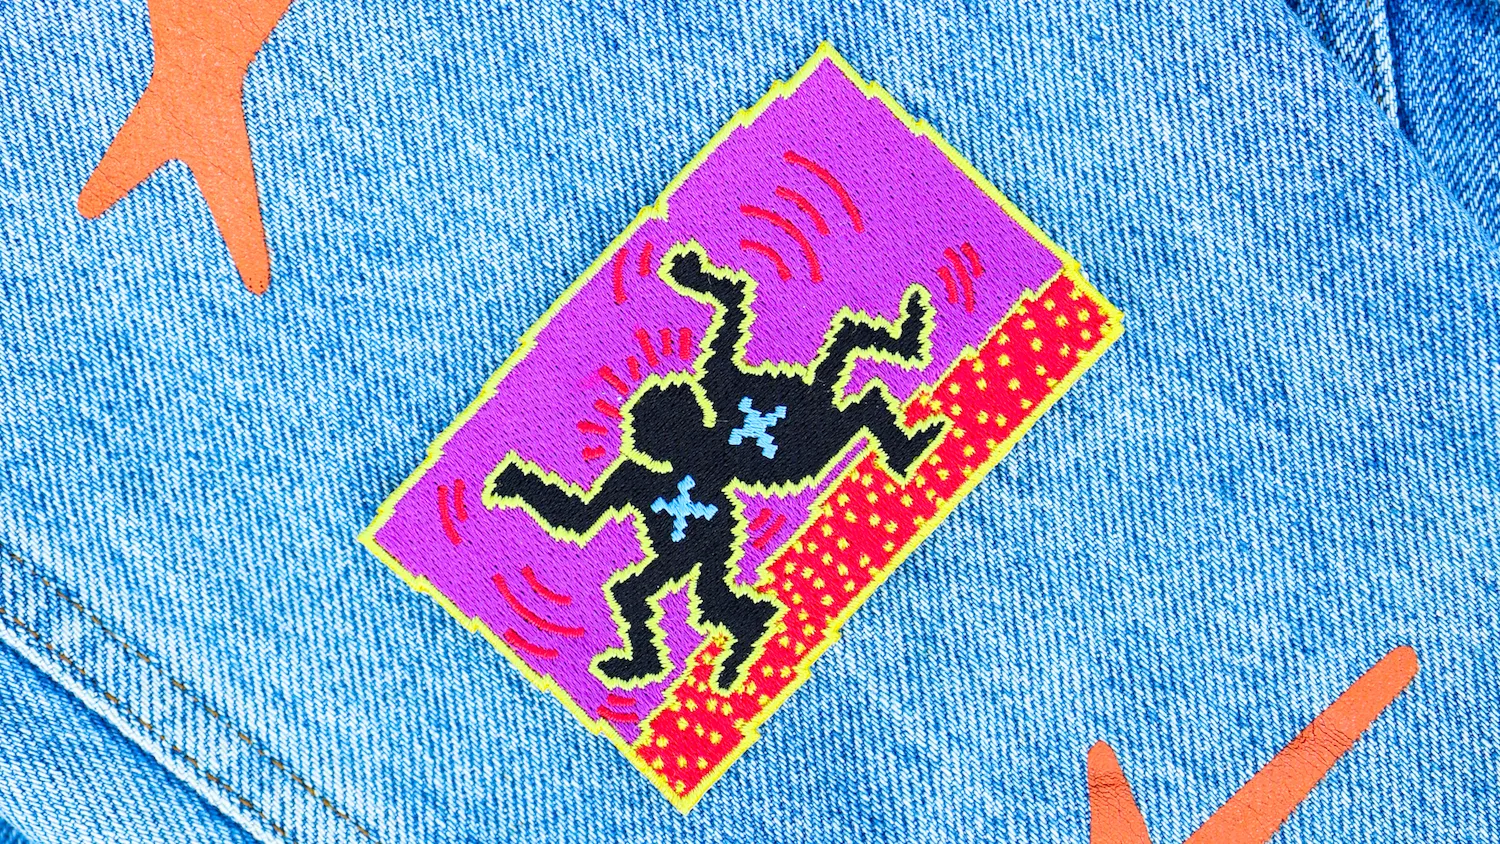 The Christie's x MNTGE Keith Haring patch. Image: MNTGE